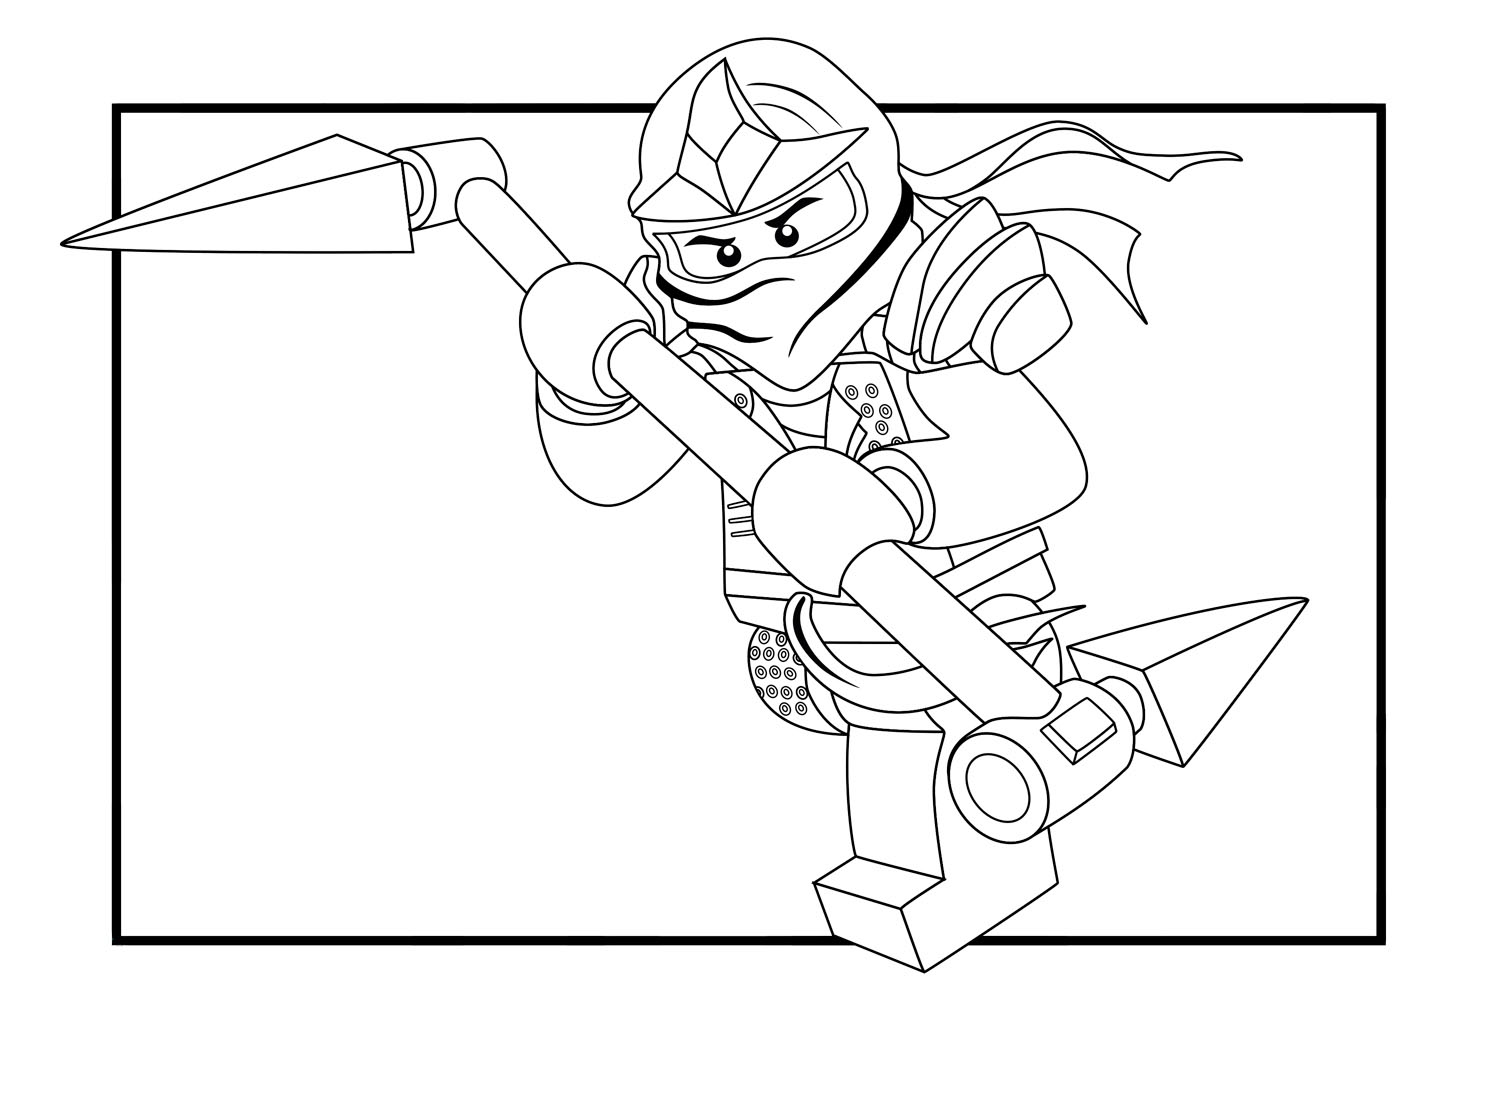 Lego Ninjago coloring pages to download and print for free